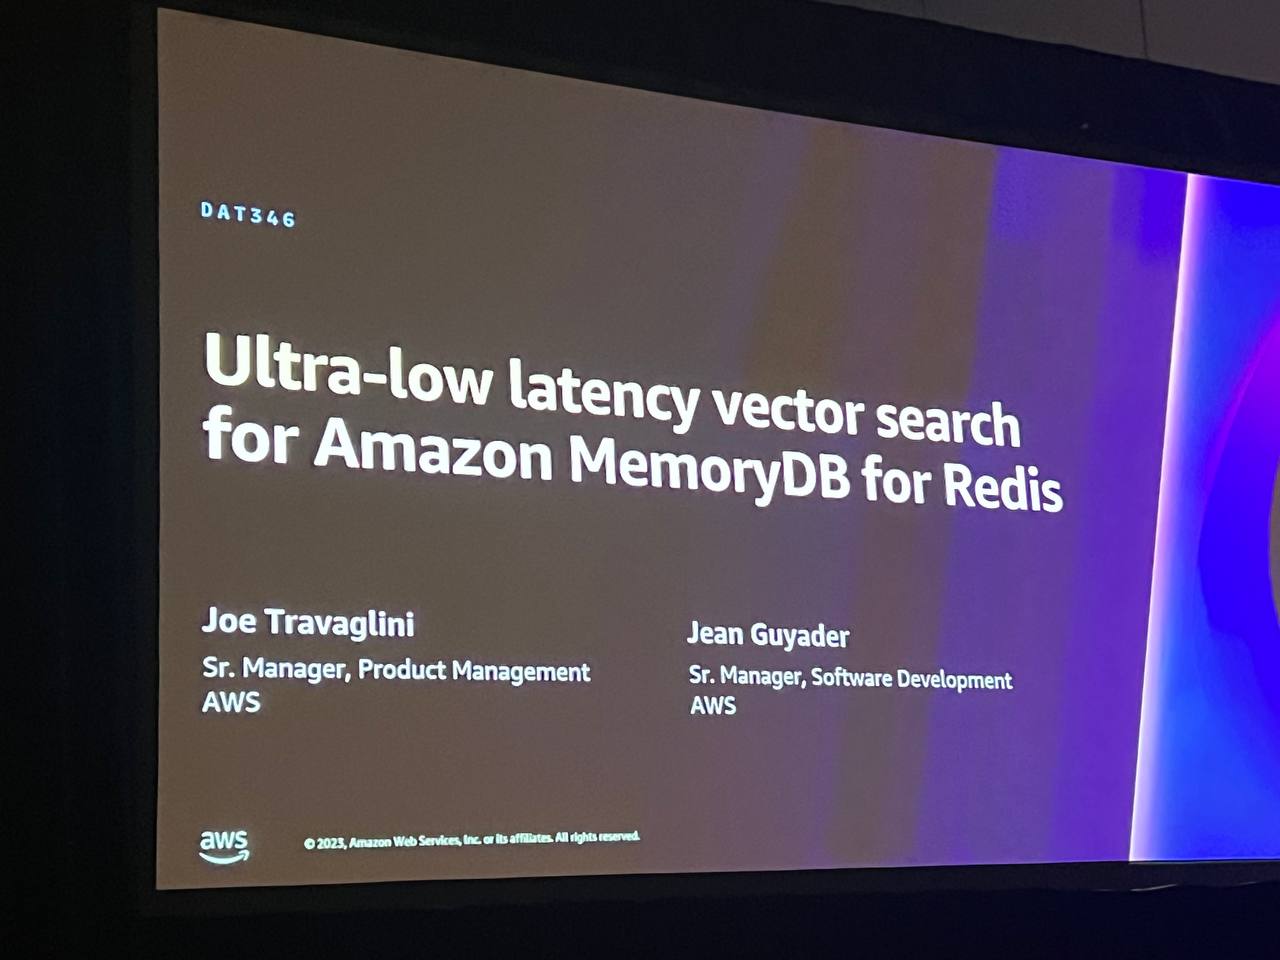 Ultra-low latency vector search for Amazon MemoryDB for Redis